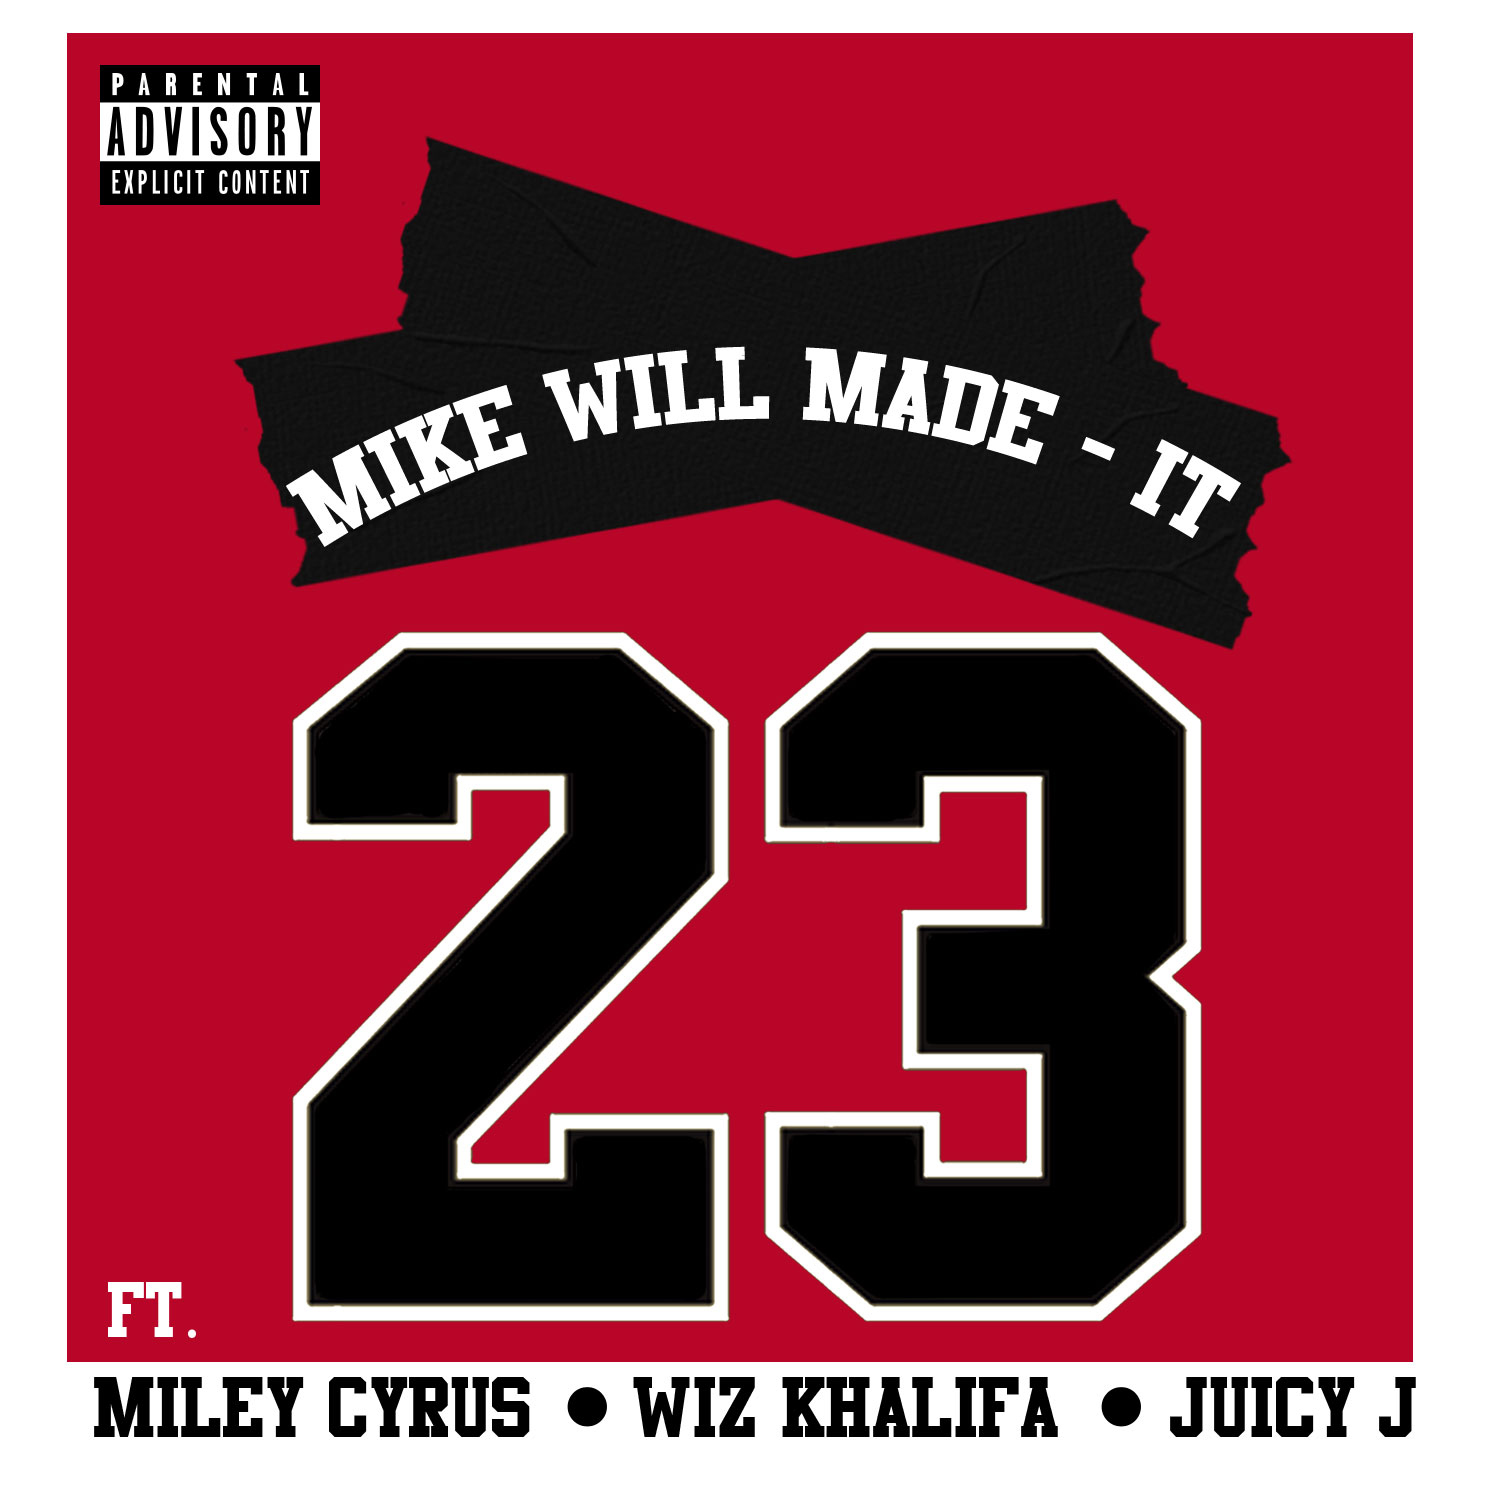 Maily Cyrus, Mike Will Made It ft feat. Wiz Khalifa & Juicy J - 23